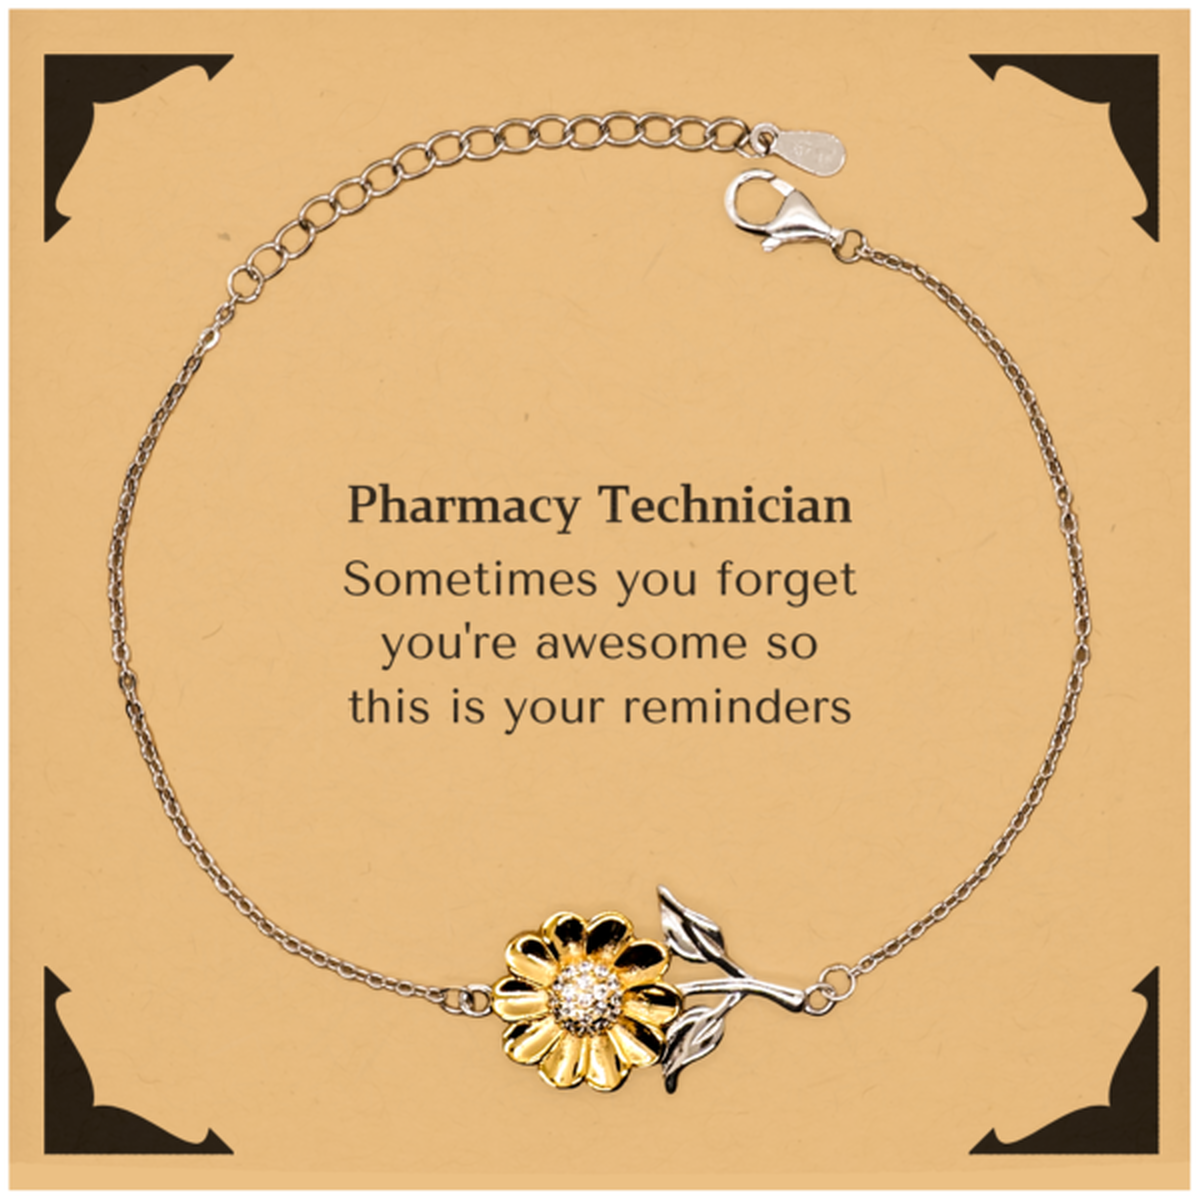 Sentimental Pharmacy Technician Sunflower Bracelet, Pharmacy Technician Sometimes you forget you're awesome so this is your reminders, Graduation Christmas Birthday Gifts for Pharmacy Technician, Men, Women, Coworkers